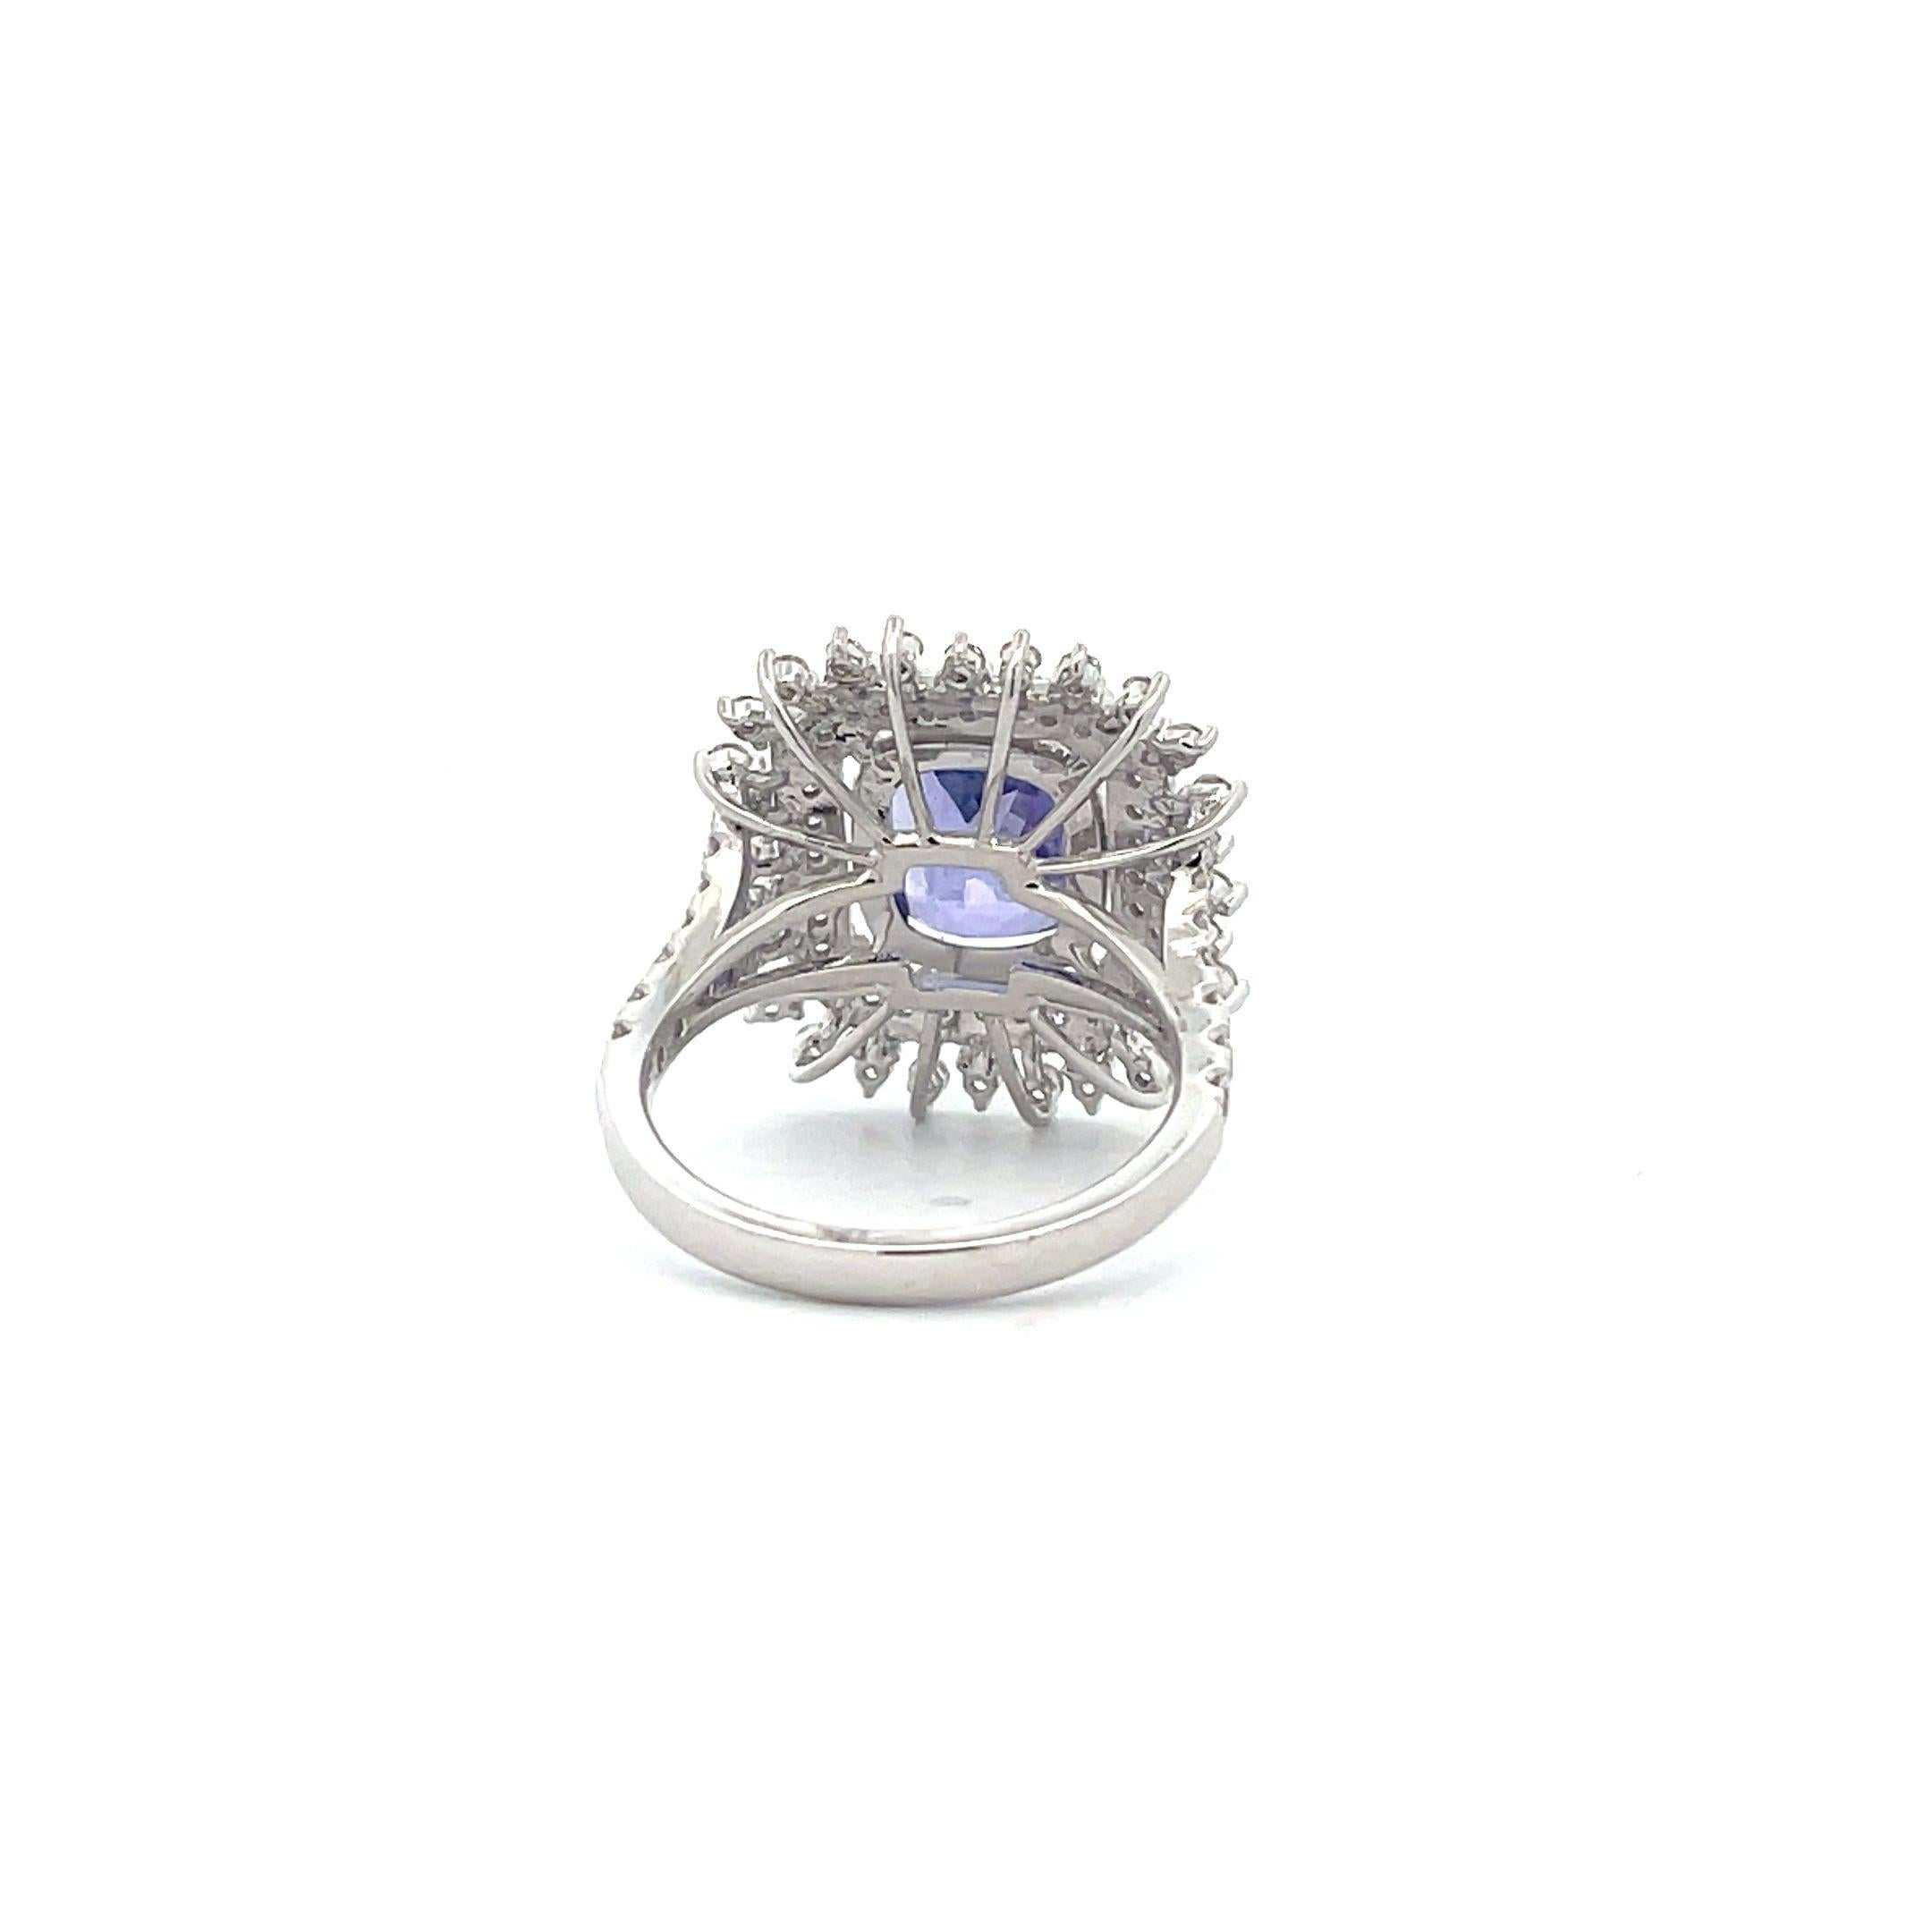 Art Deco 3.92ct. Cushion-Cut Tanzanite Double Halo Cocktail Engagement Ring